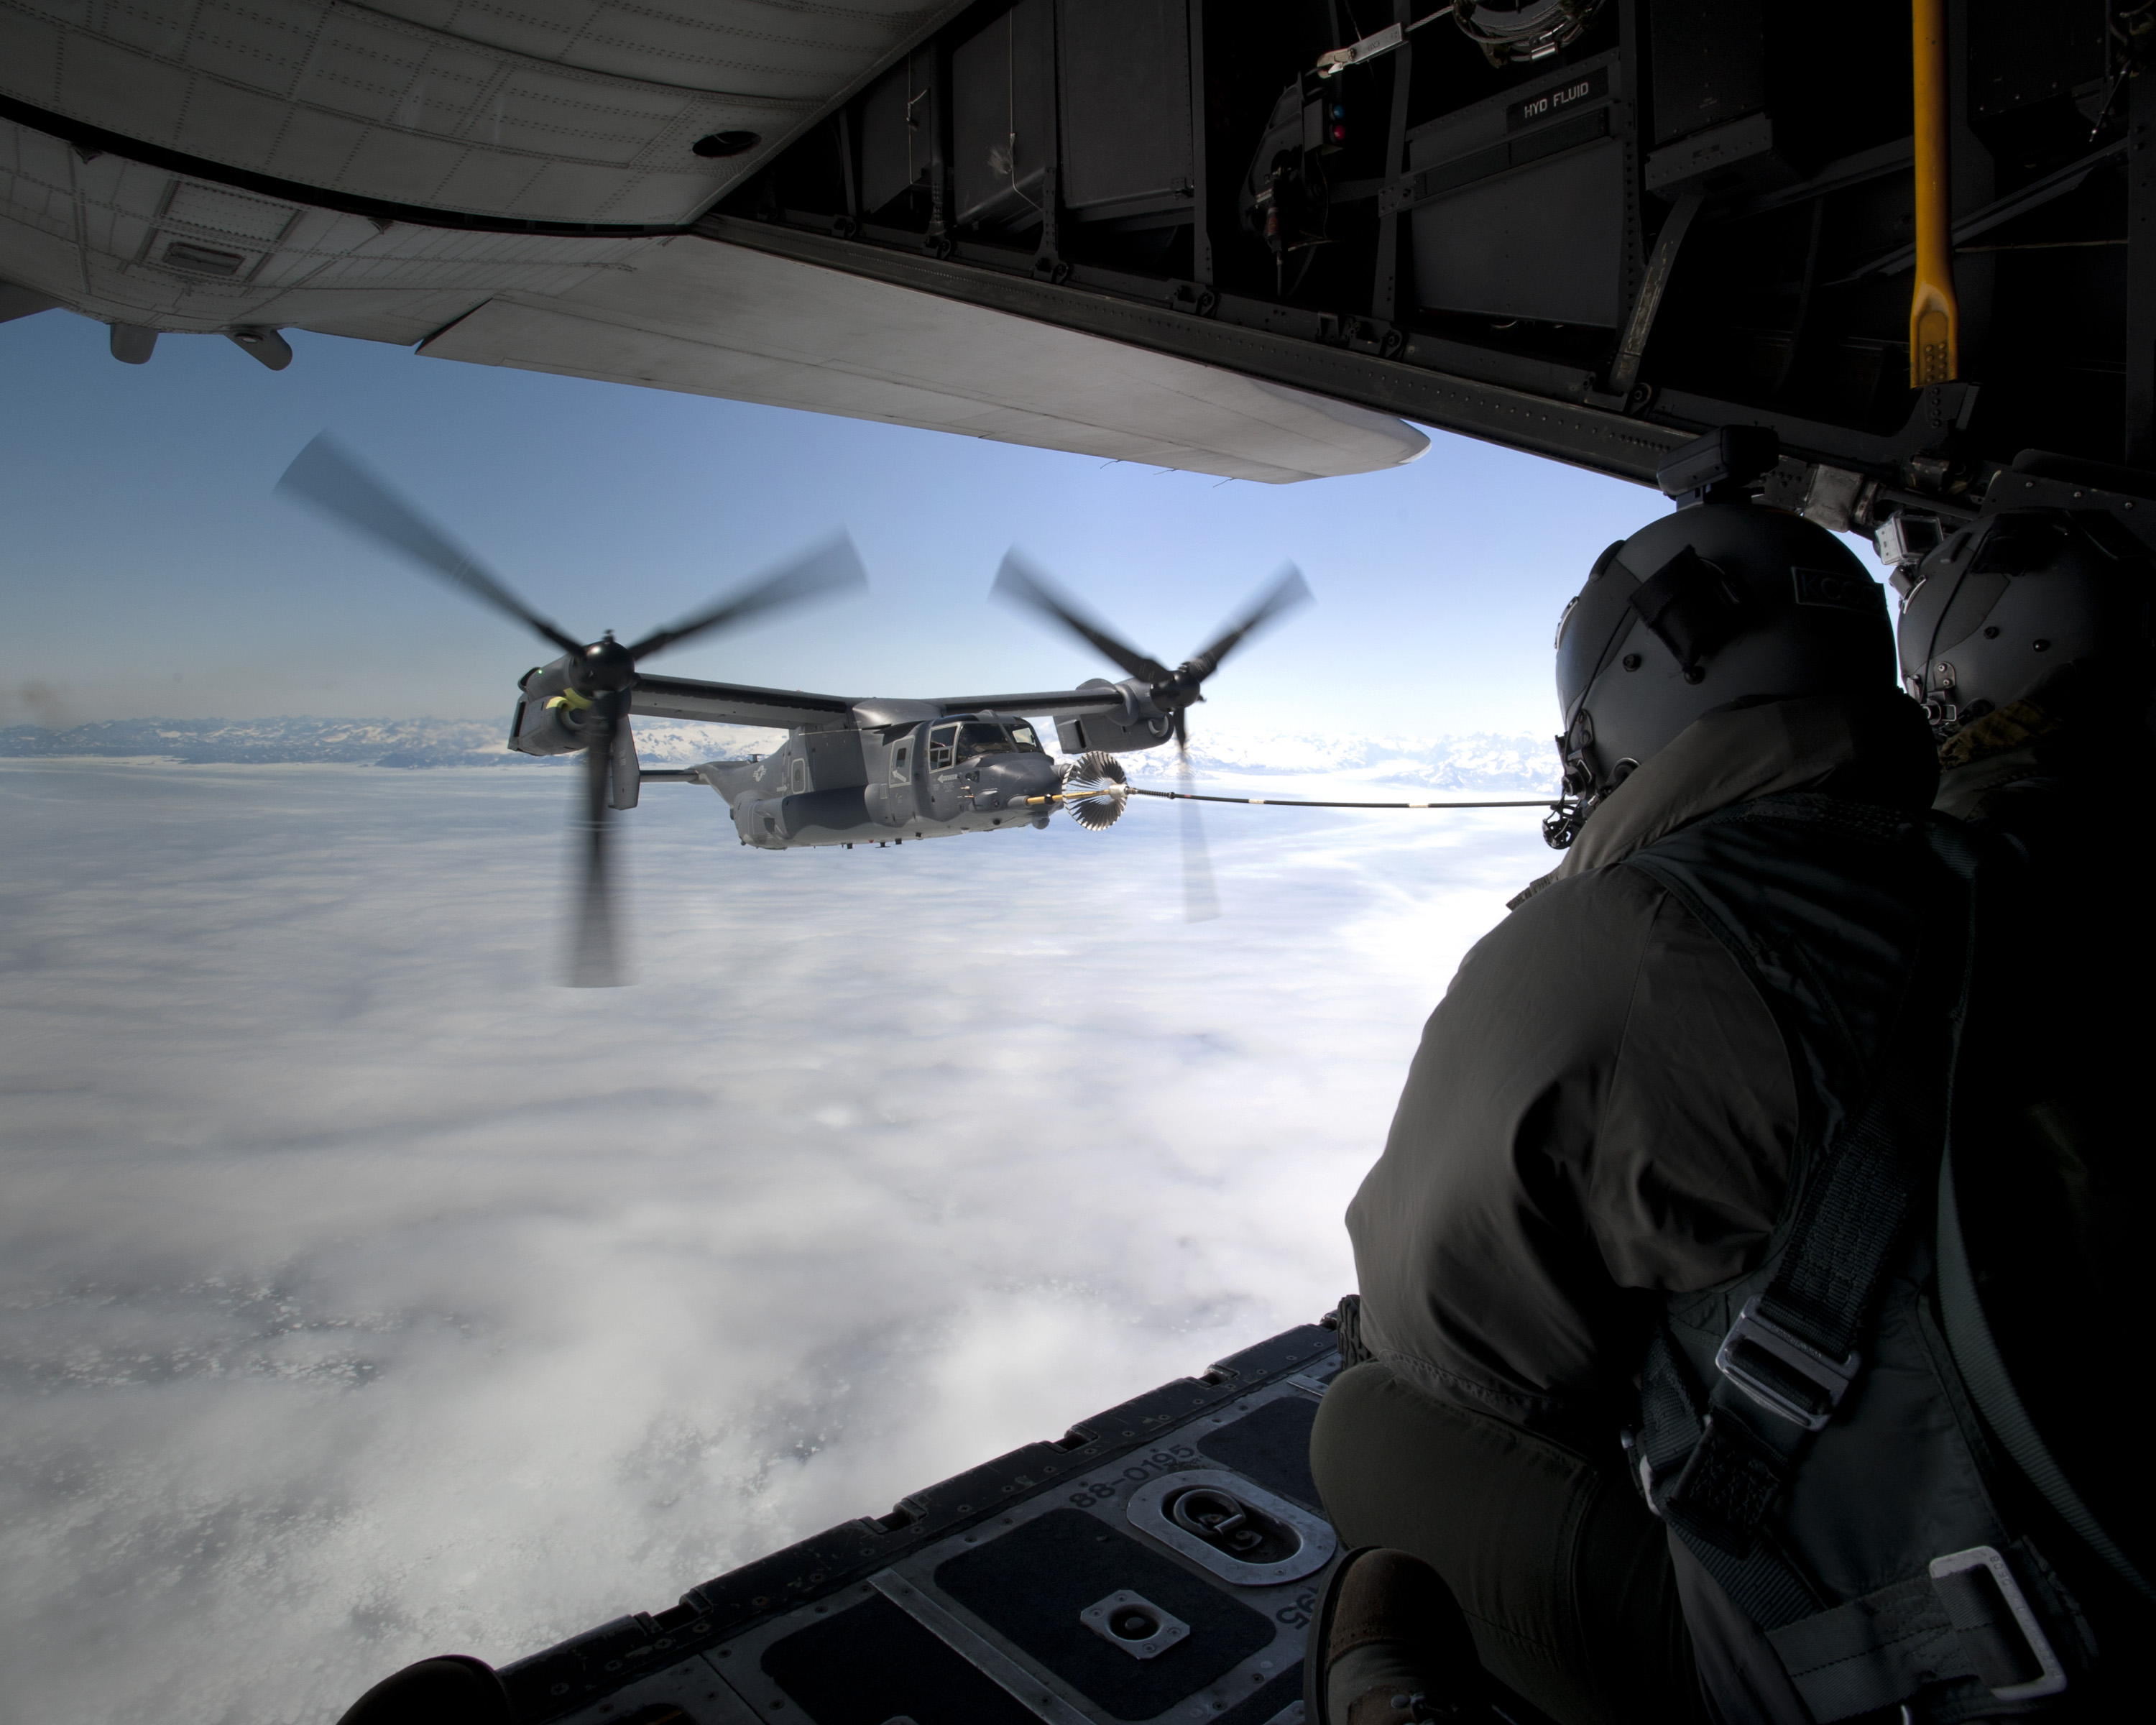 A 352nd Special Operations Group CV-22 refueling from one of the squadrons MC-130s. (USAF photo)